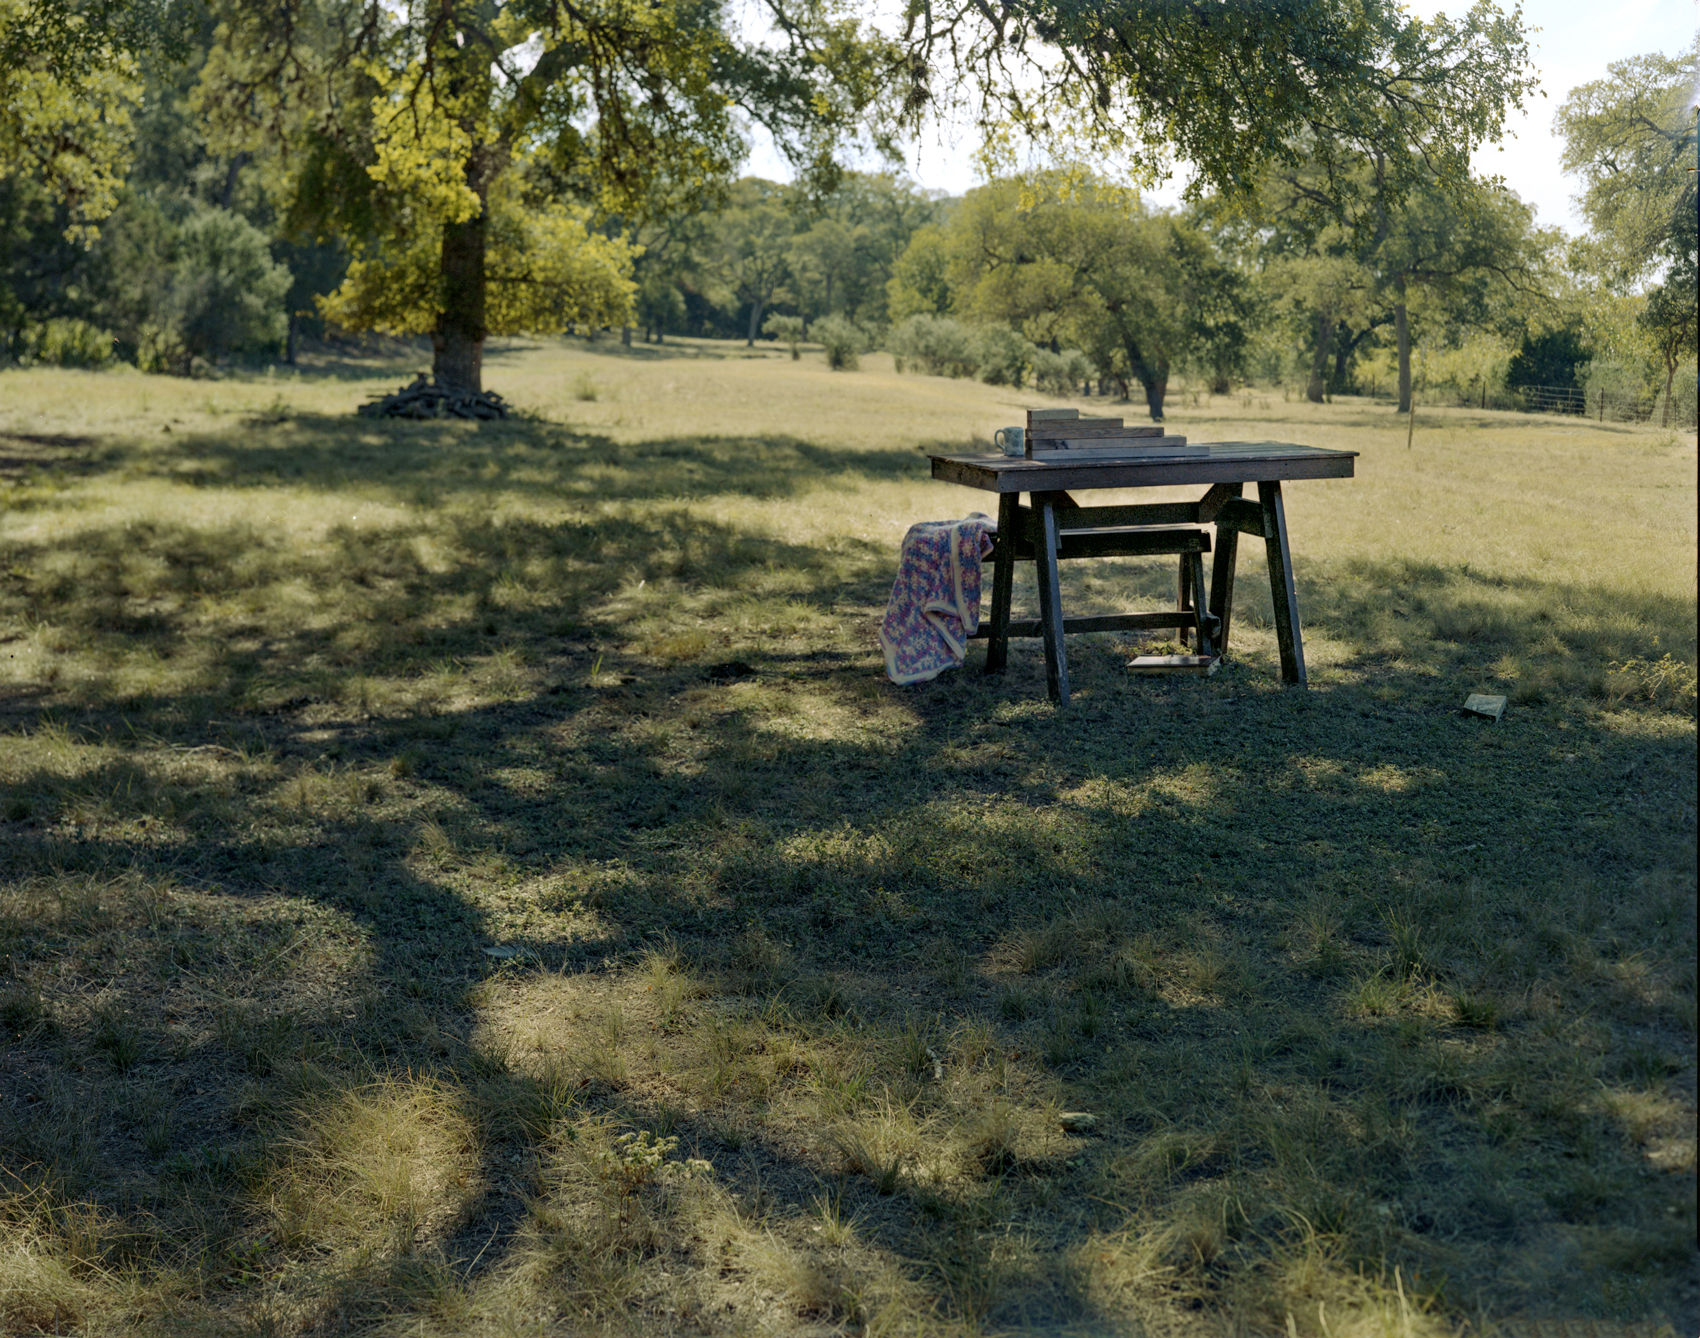 Claire Boston, Target Practice, Archival Pigment Print, Fall 2021, 30in. x 35in.